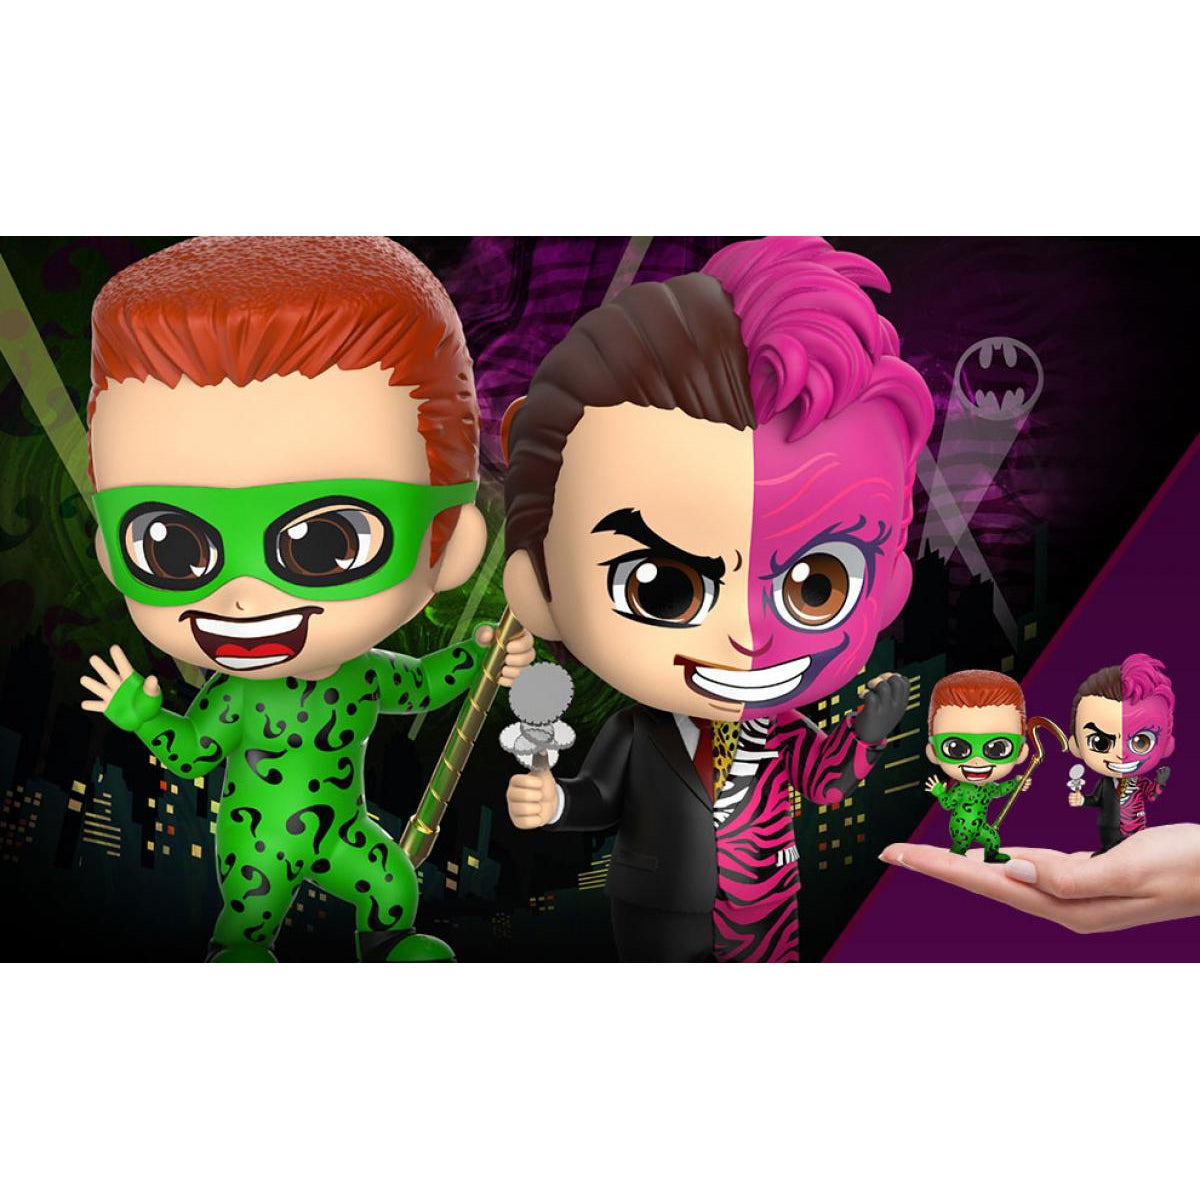 The Riddler & Two-Face Cosbaby(s) Collectible Set